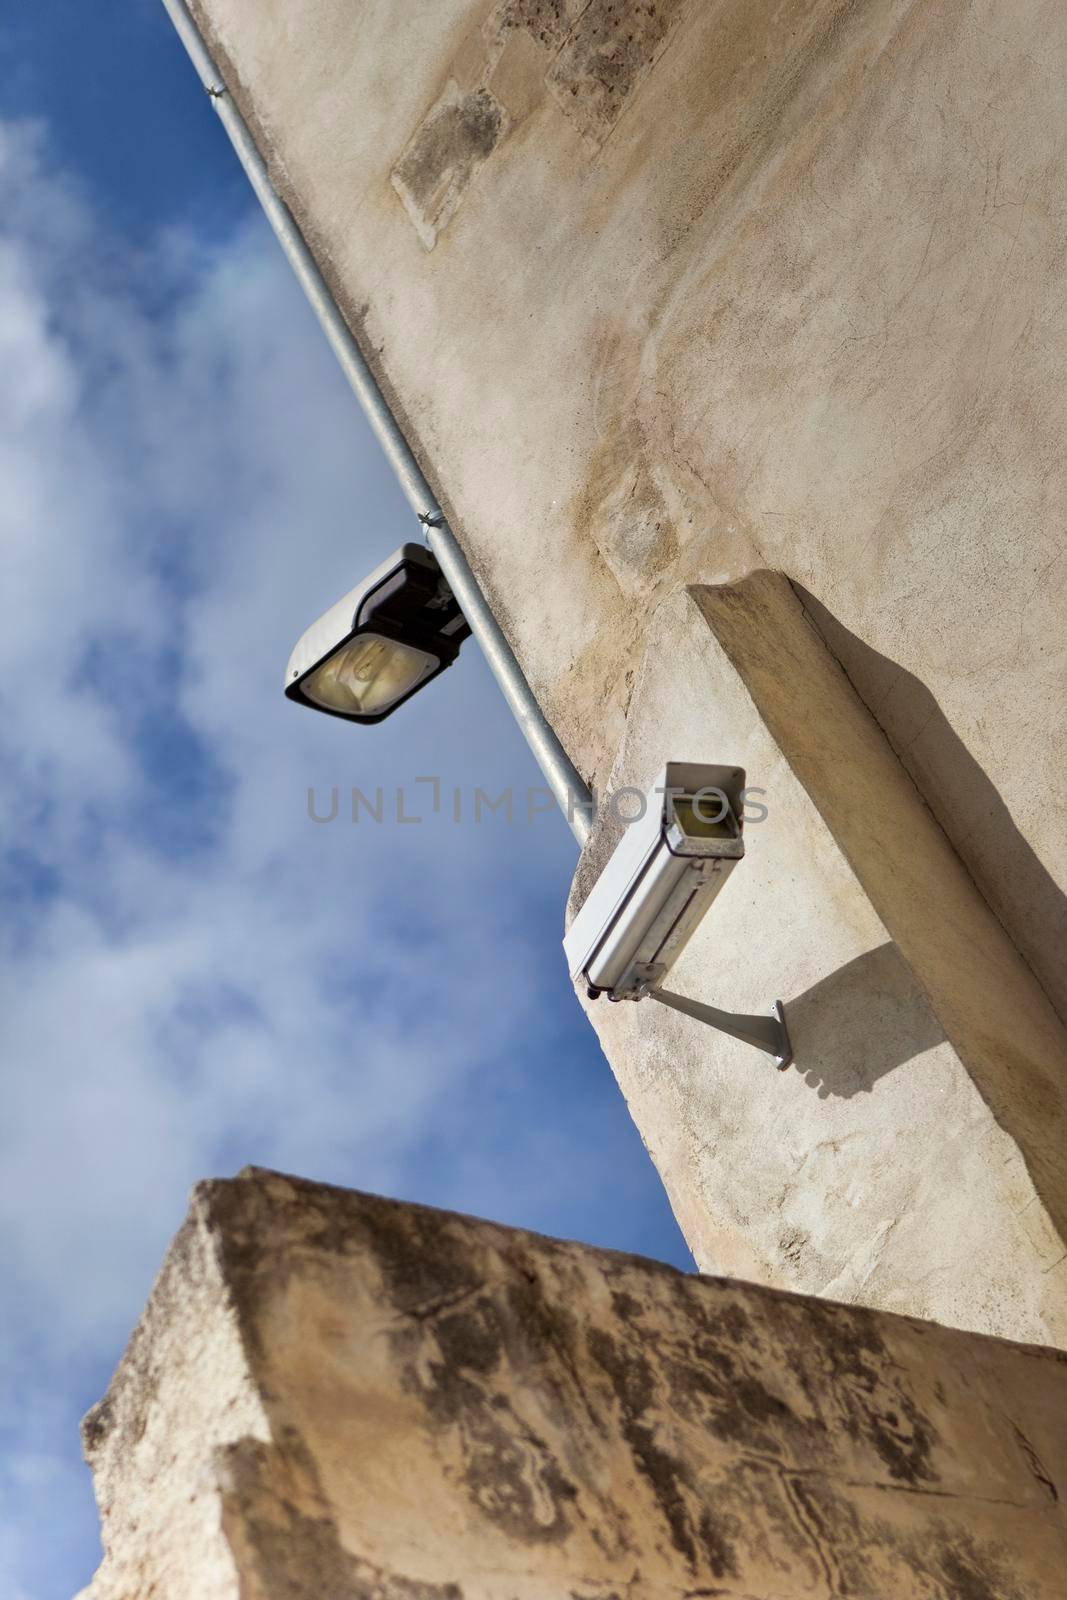 Outdoor street light and security camera on a building